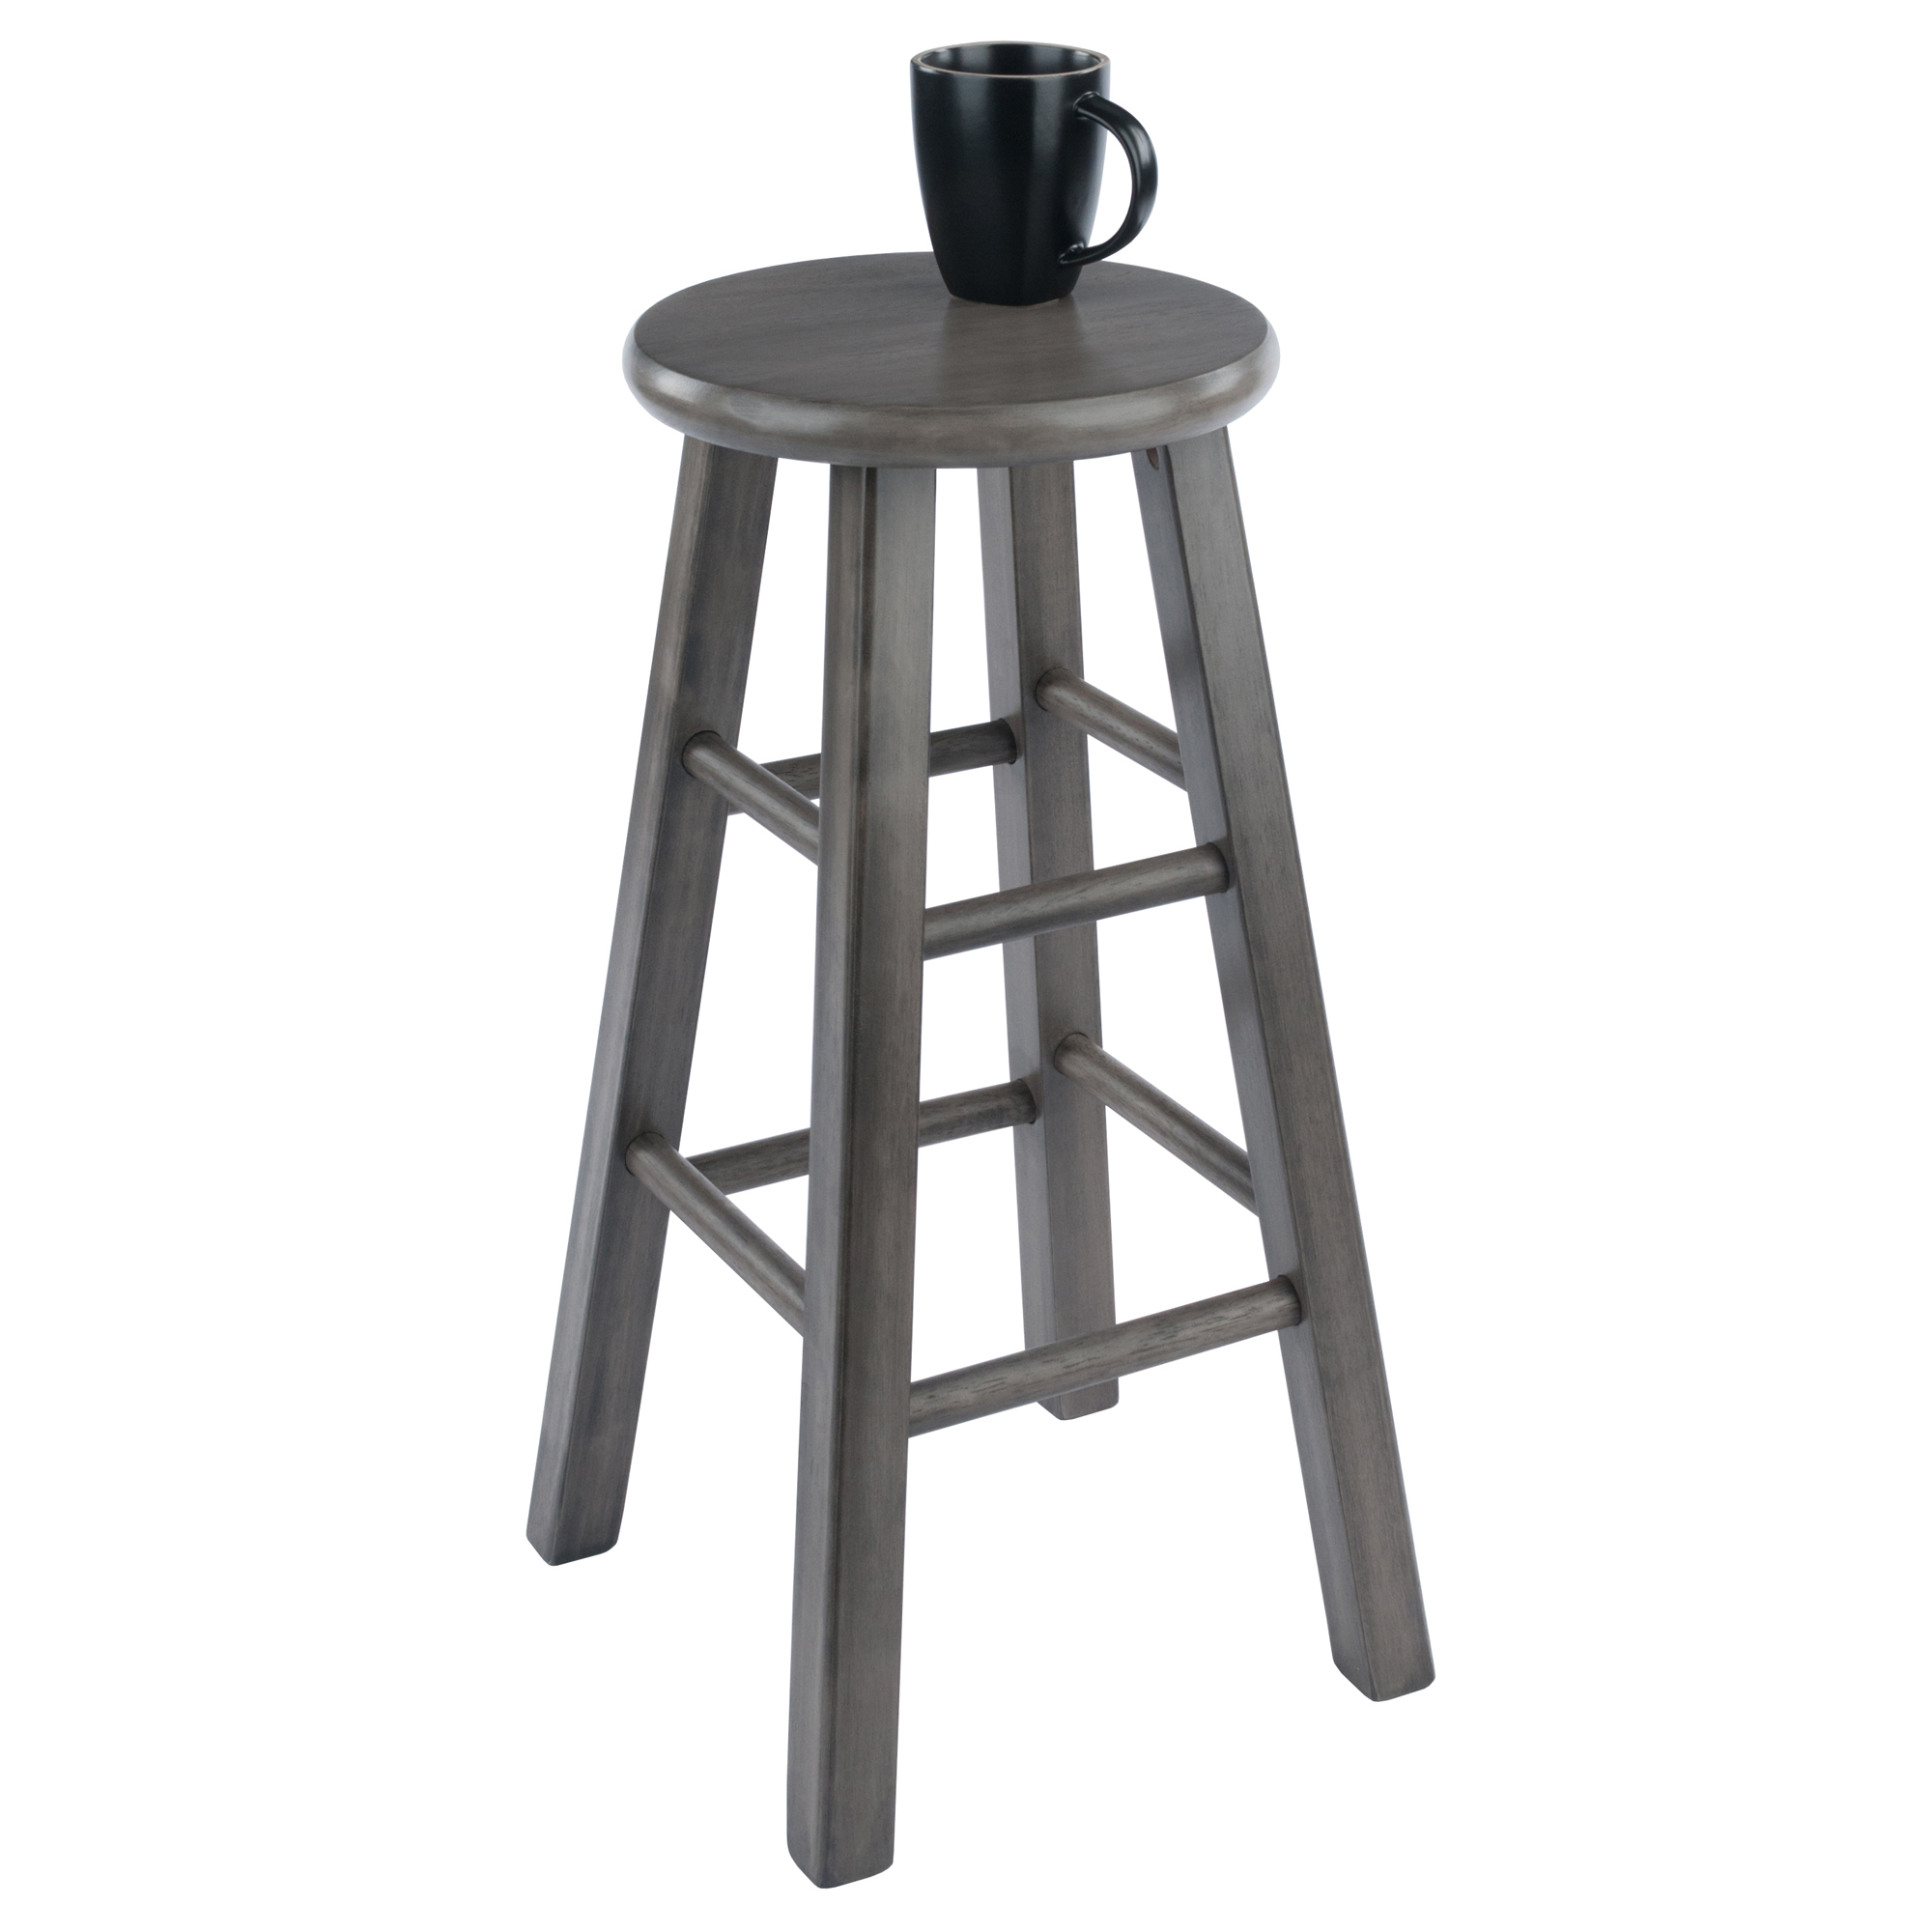 Winsome Wood Ivy 24" Counter Stool, Rustic Gray Finish - image 4 of 7